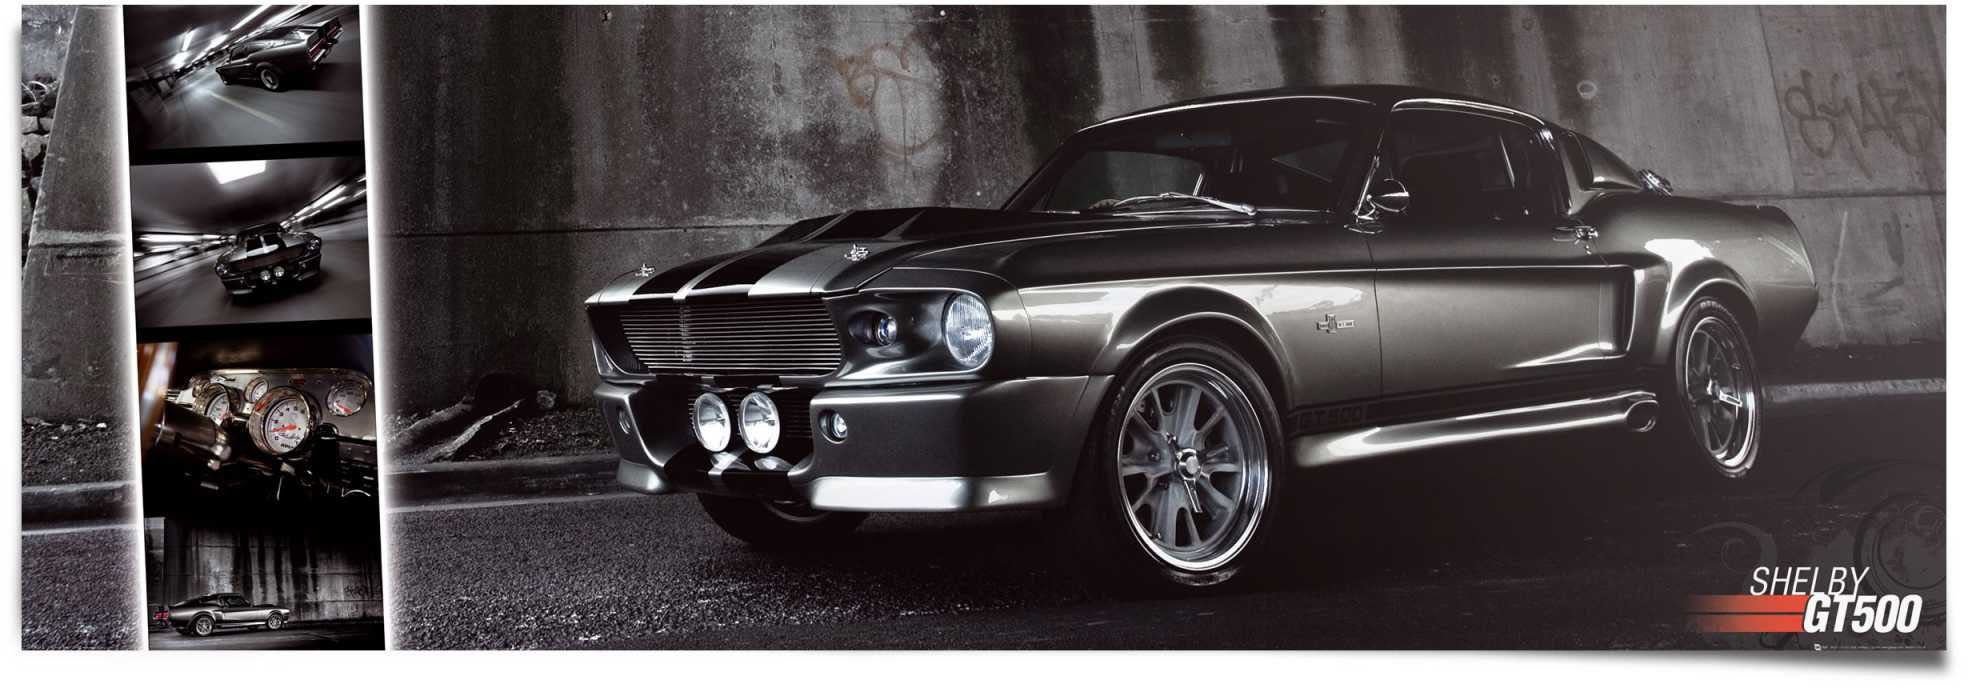 Reinders! Poster (1 Ford Mustang Easton GT500, St)